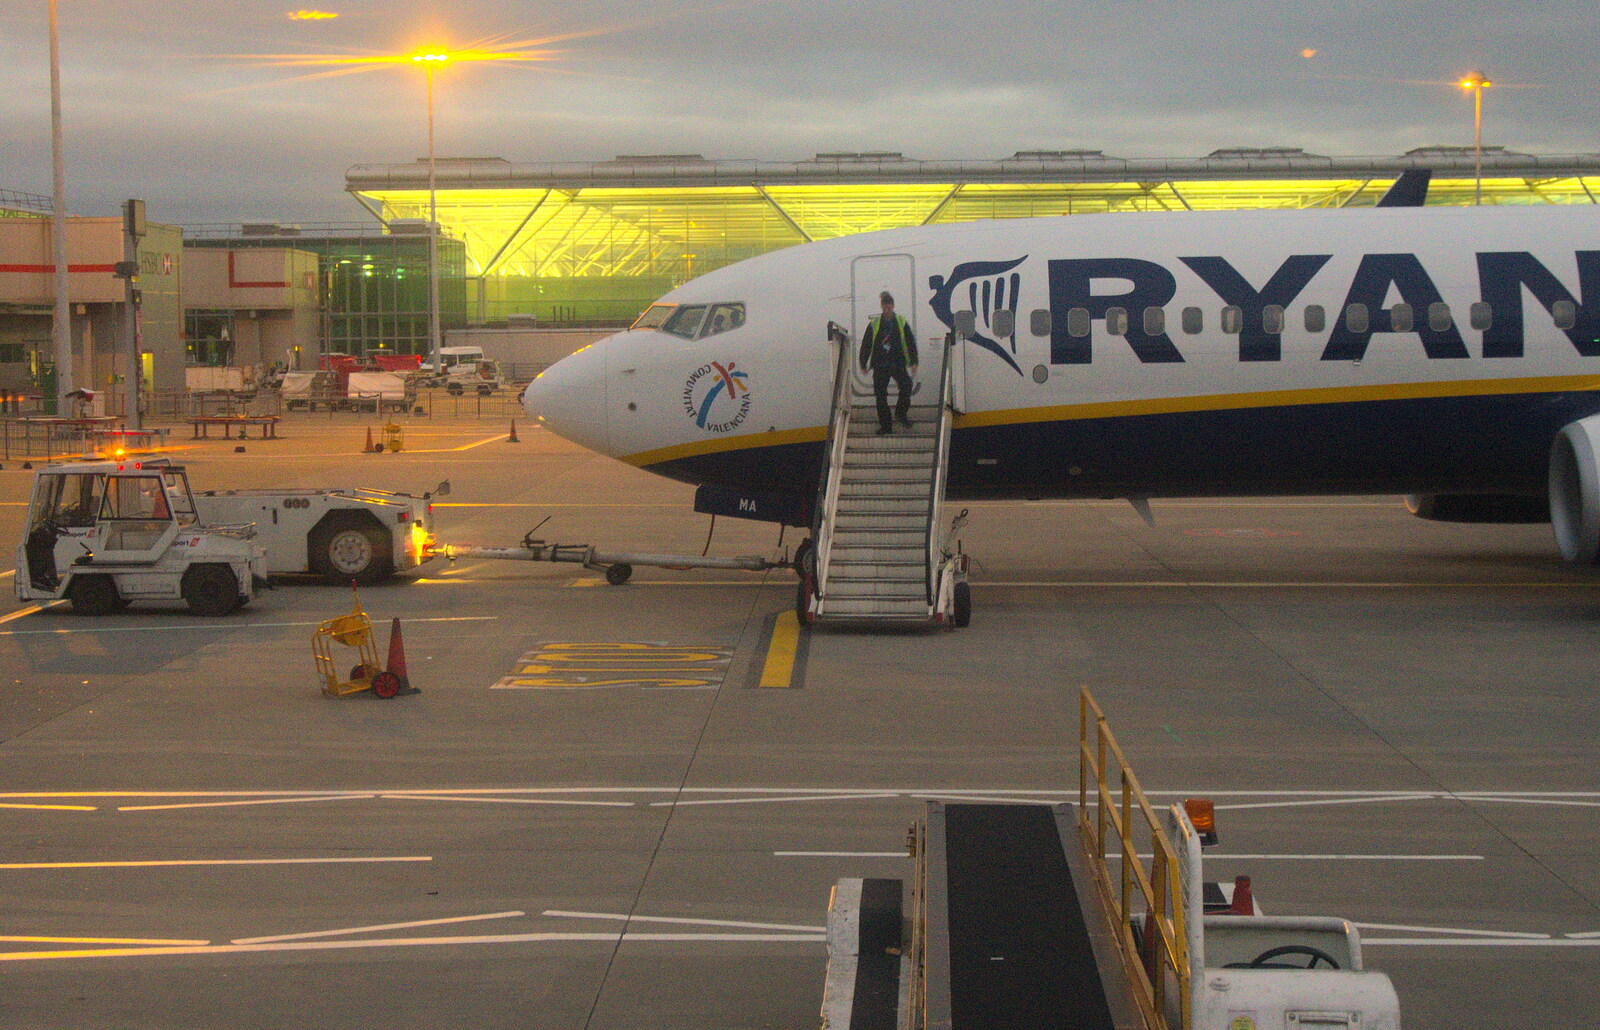 A Ruinair 737 on the stand at Stansted Airport from A Morning in Blackrock, County Dublin, Ireland - 8th January 2012